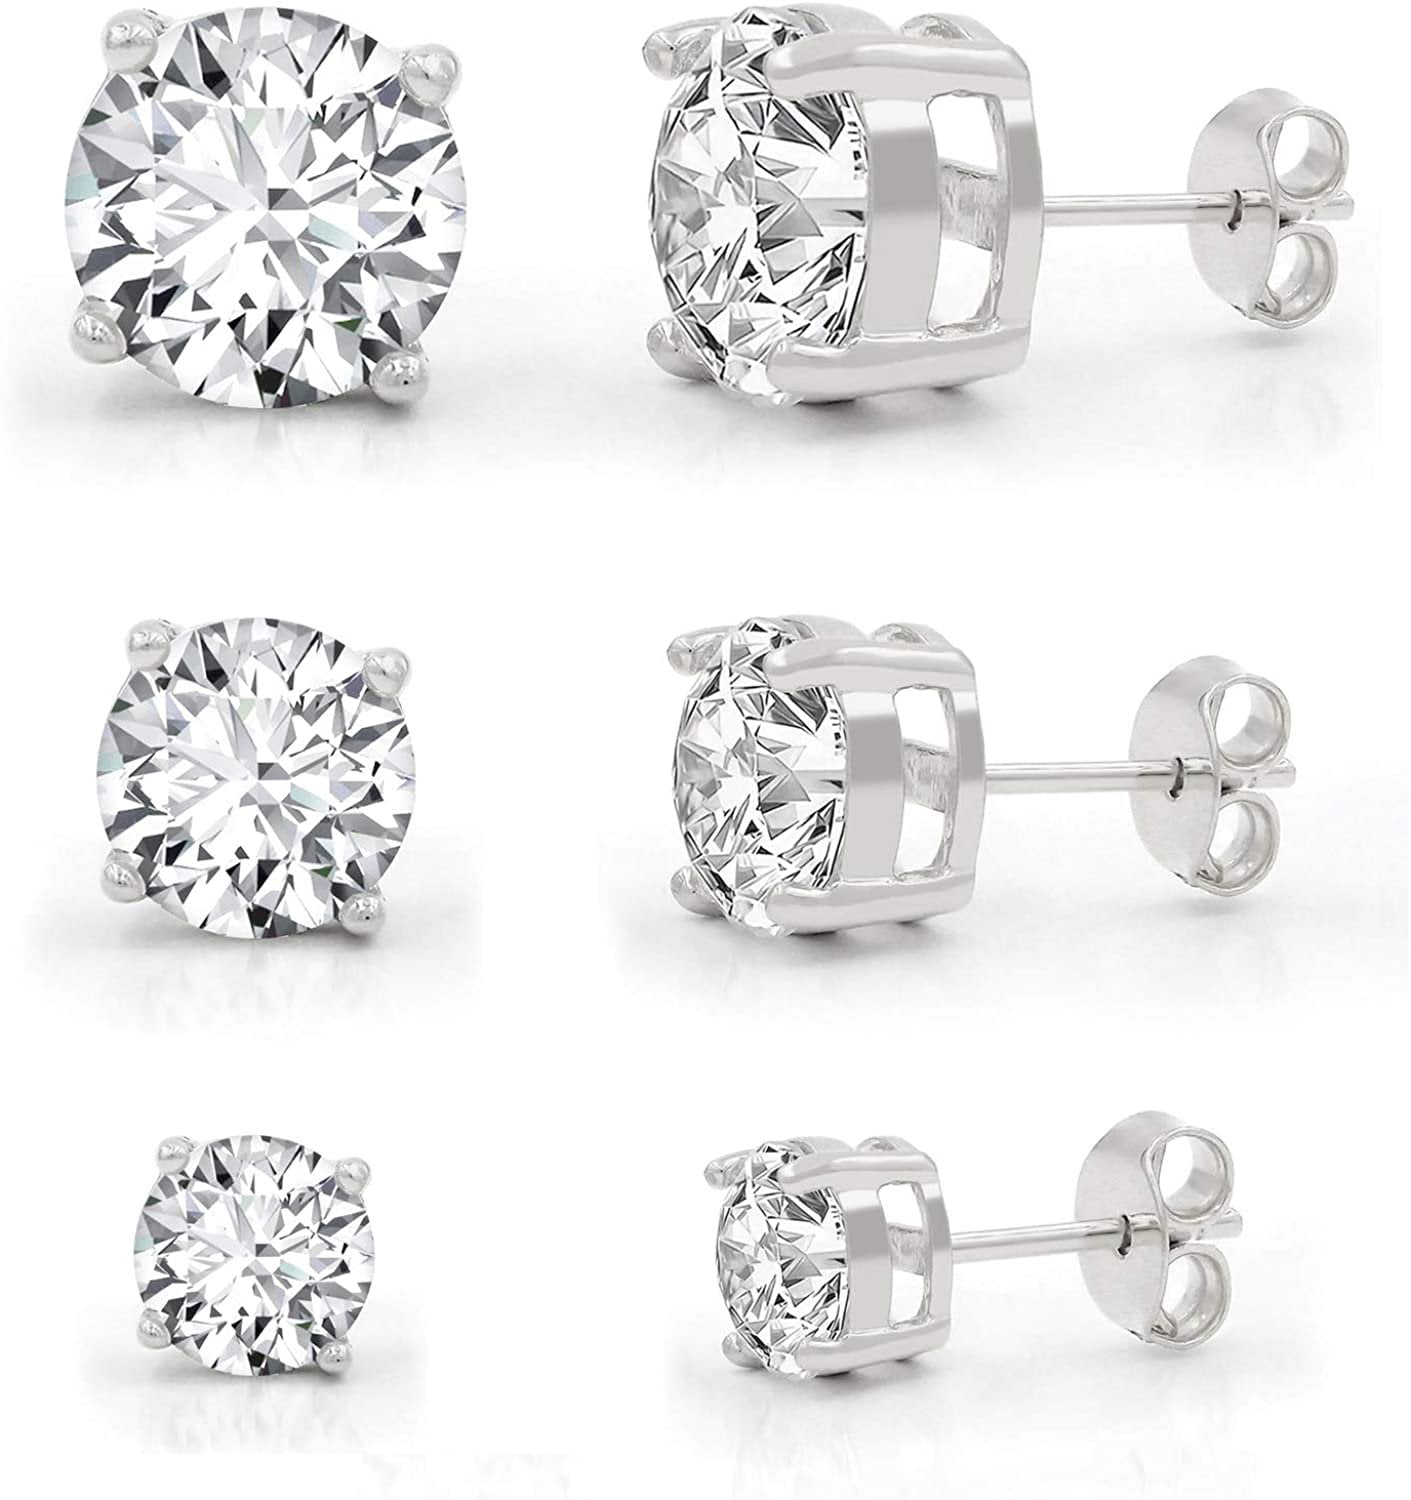 .925 Sterling Silver Round Cut Clear Cubic Zirconia Stud Earrings 4 Carats